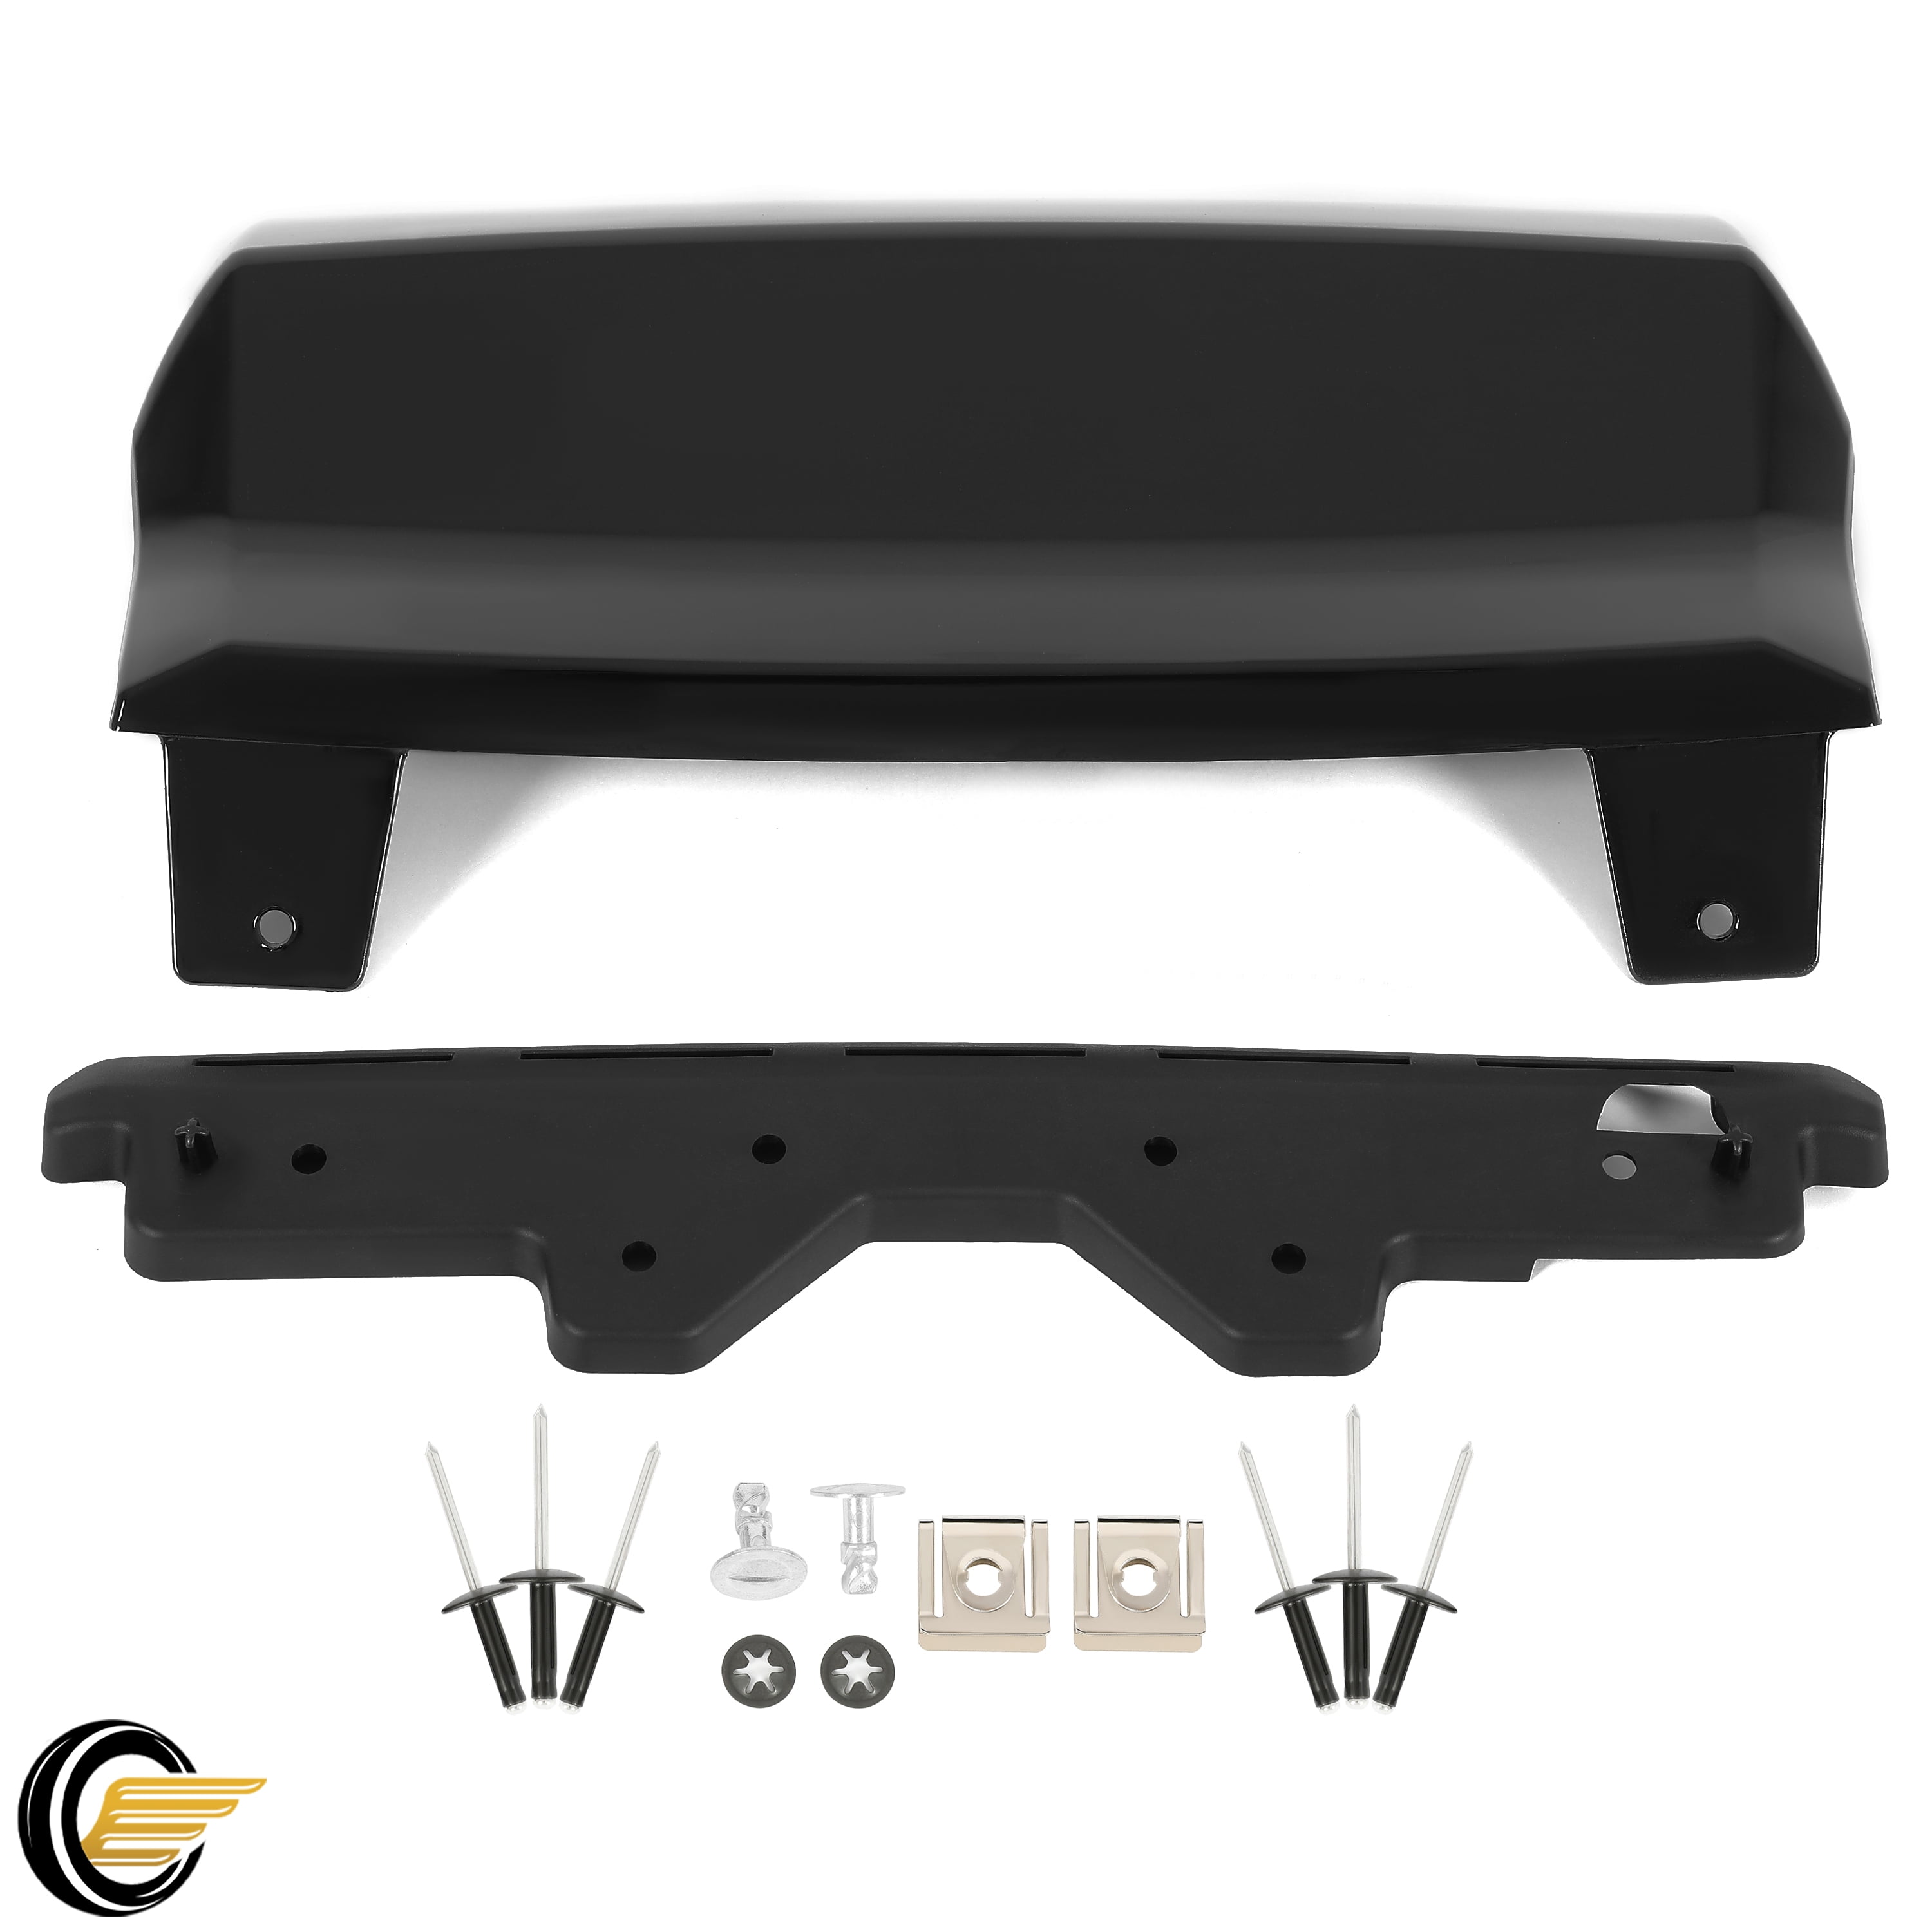 W/ Reciever Cover 2017 Suburban for 2016 for Hitch Cover 2019 KOJEM Tahoe Bracket Hitch Trailer 2015-2020 23139222 2018